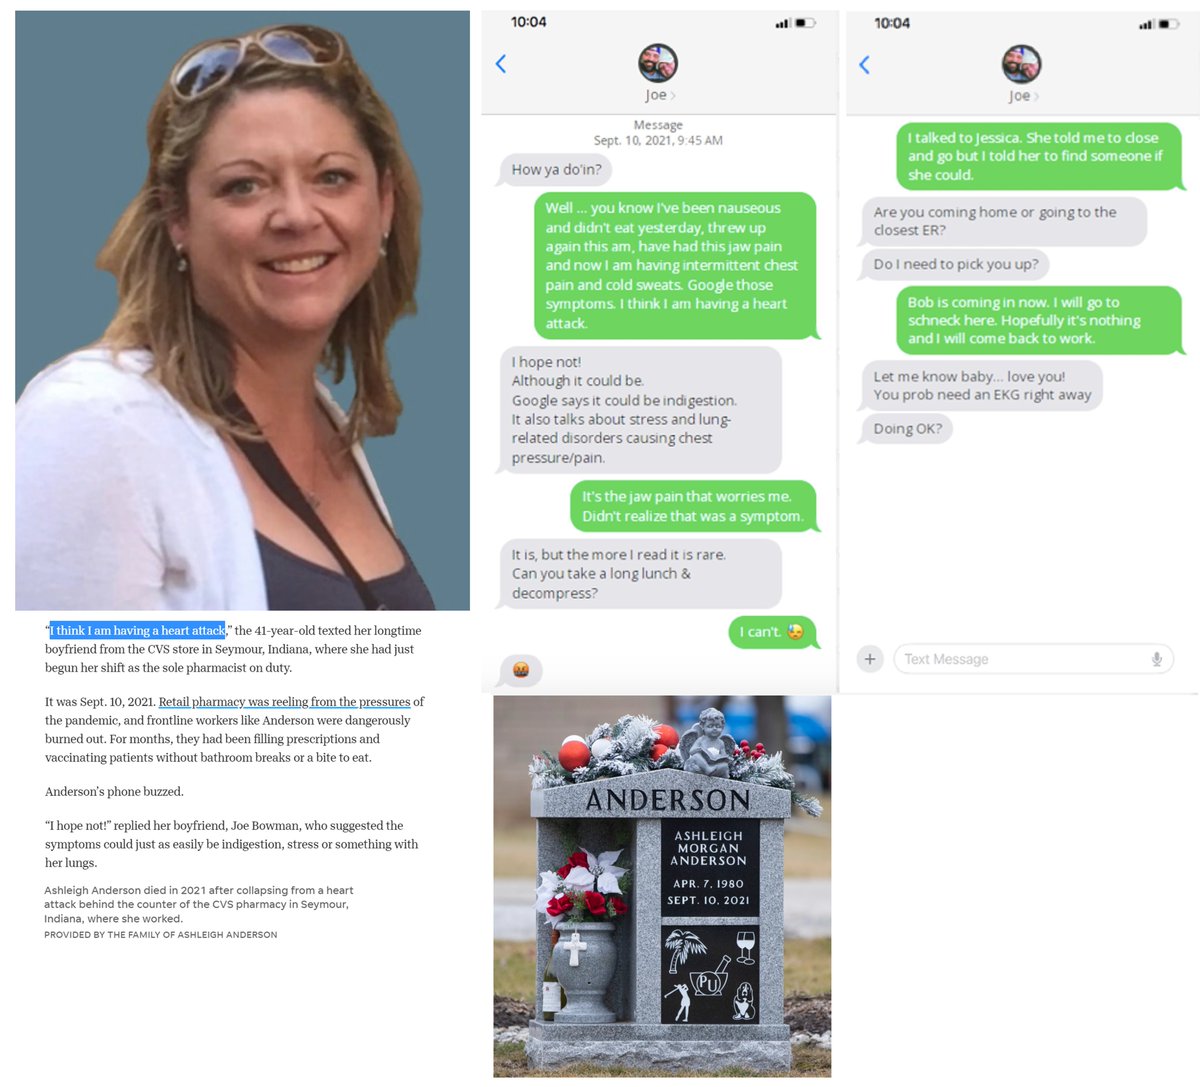 Seymour, IN - 41 year old Asleigh Morgan Anderson was the sole pharmacist on duty at CVS store when she texted her boyfriend thinking she was having a heart attack. She was. She died Sep.10, 2021. COVID-19 mRNA Vaccine mandated profession & sudden cardiac death #DiedSuddenly